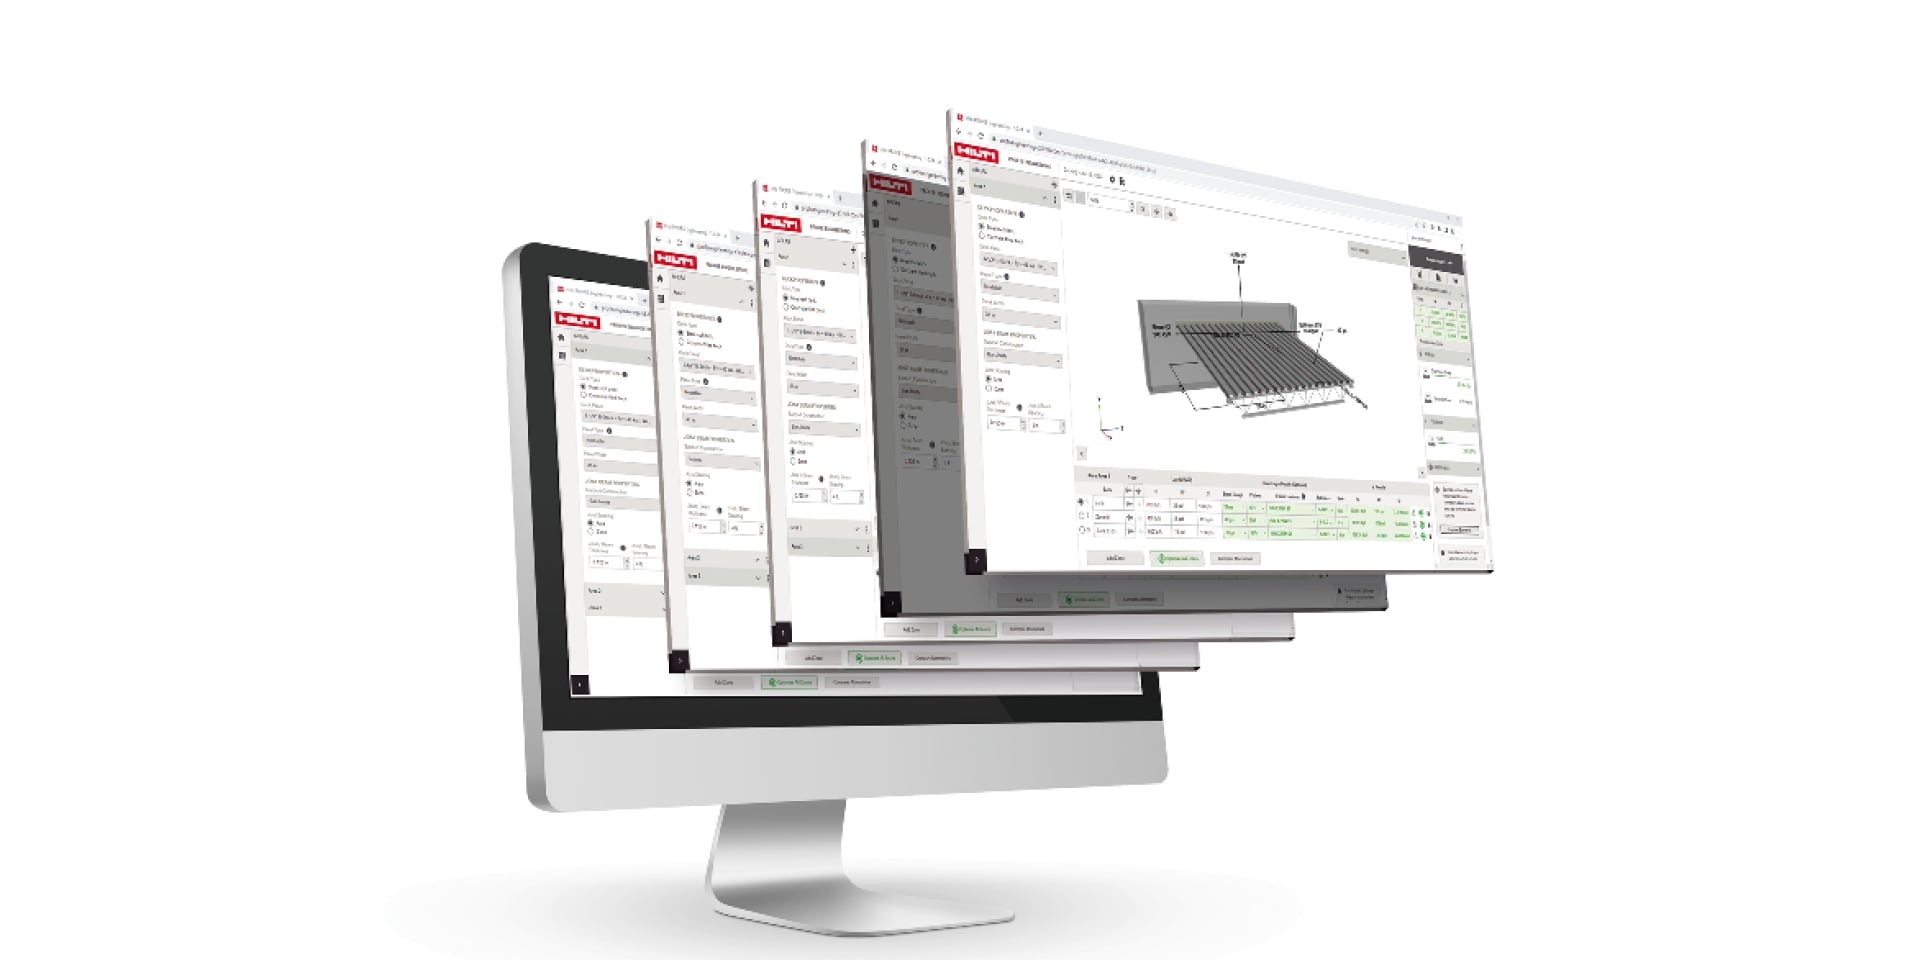 Power Tools, Fasteners and Software for Construction - Hilti USA 